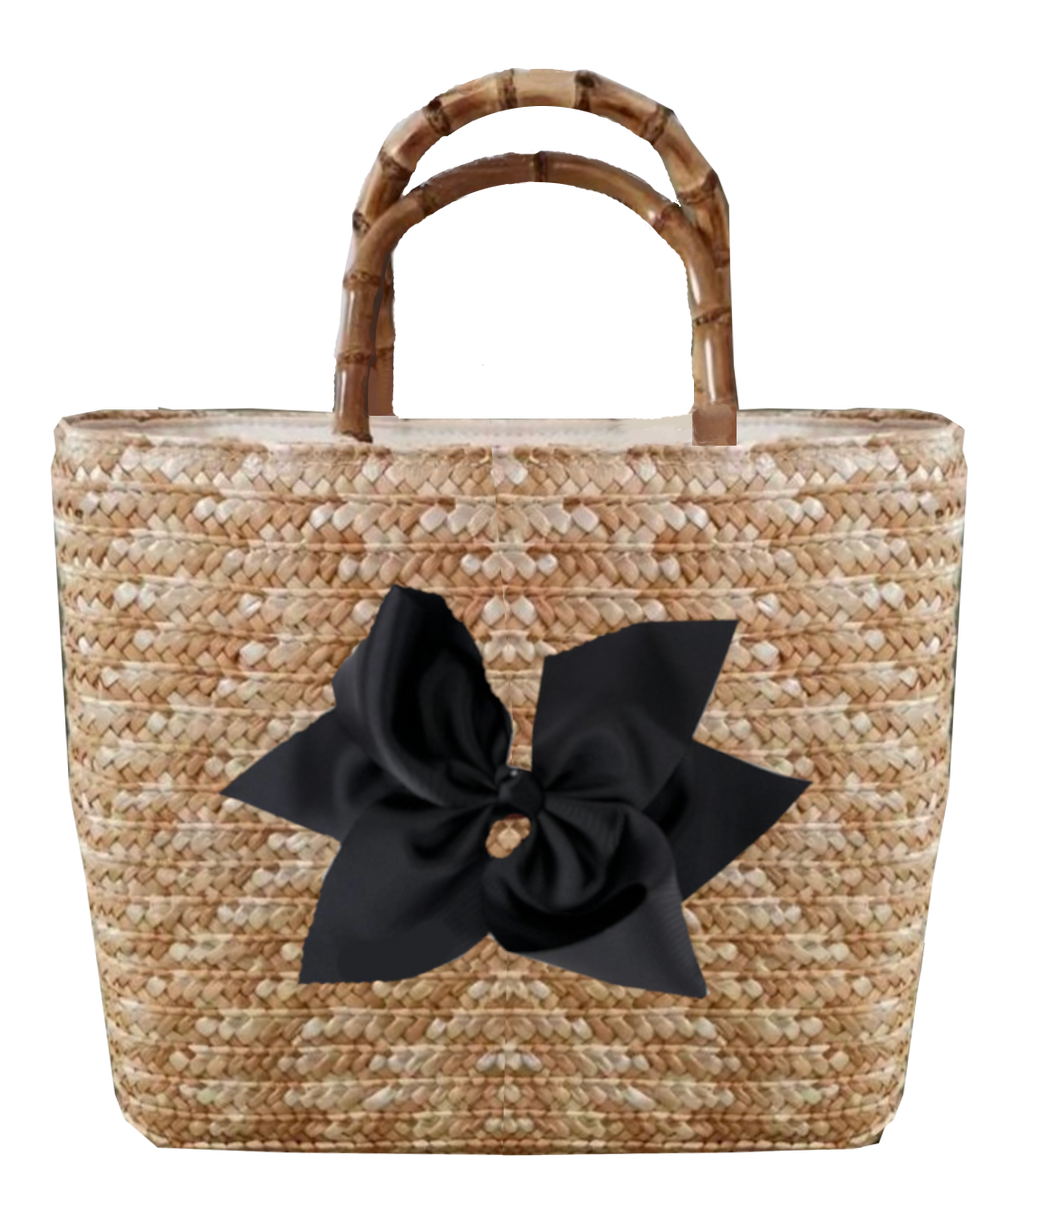 Sankaty Straw Tote with Interchangeable Bow - Black